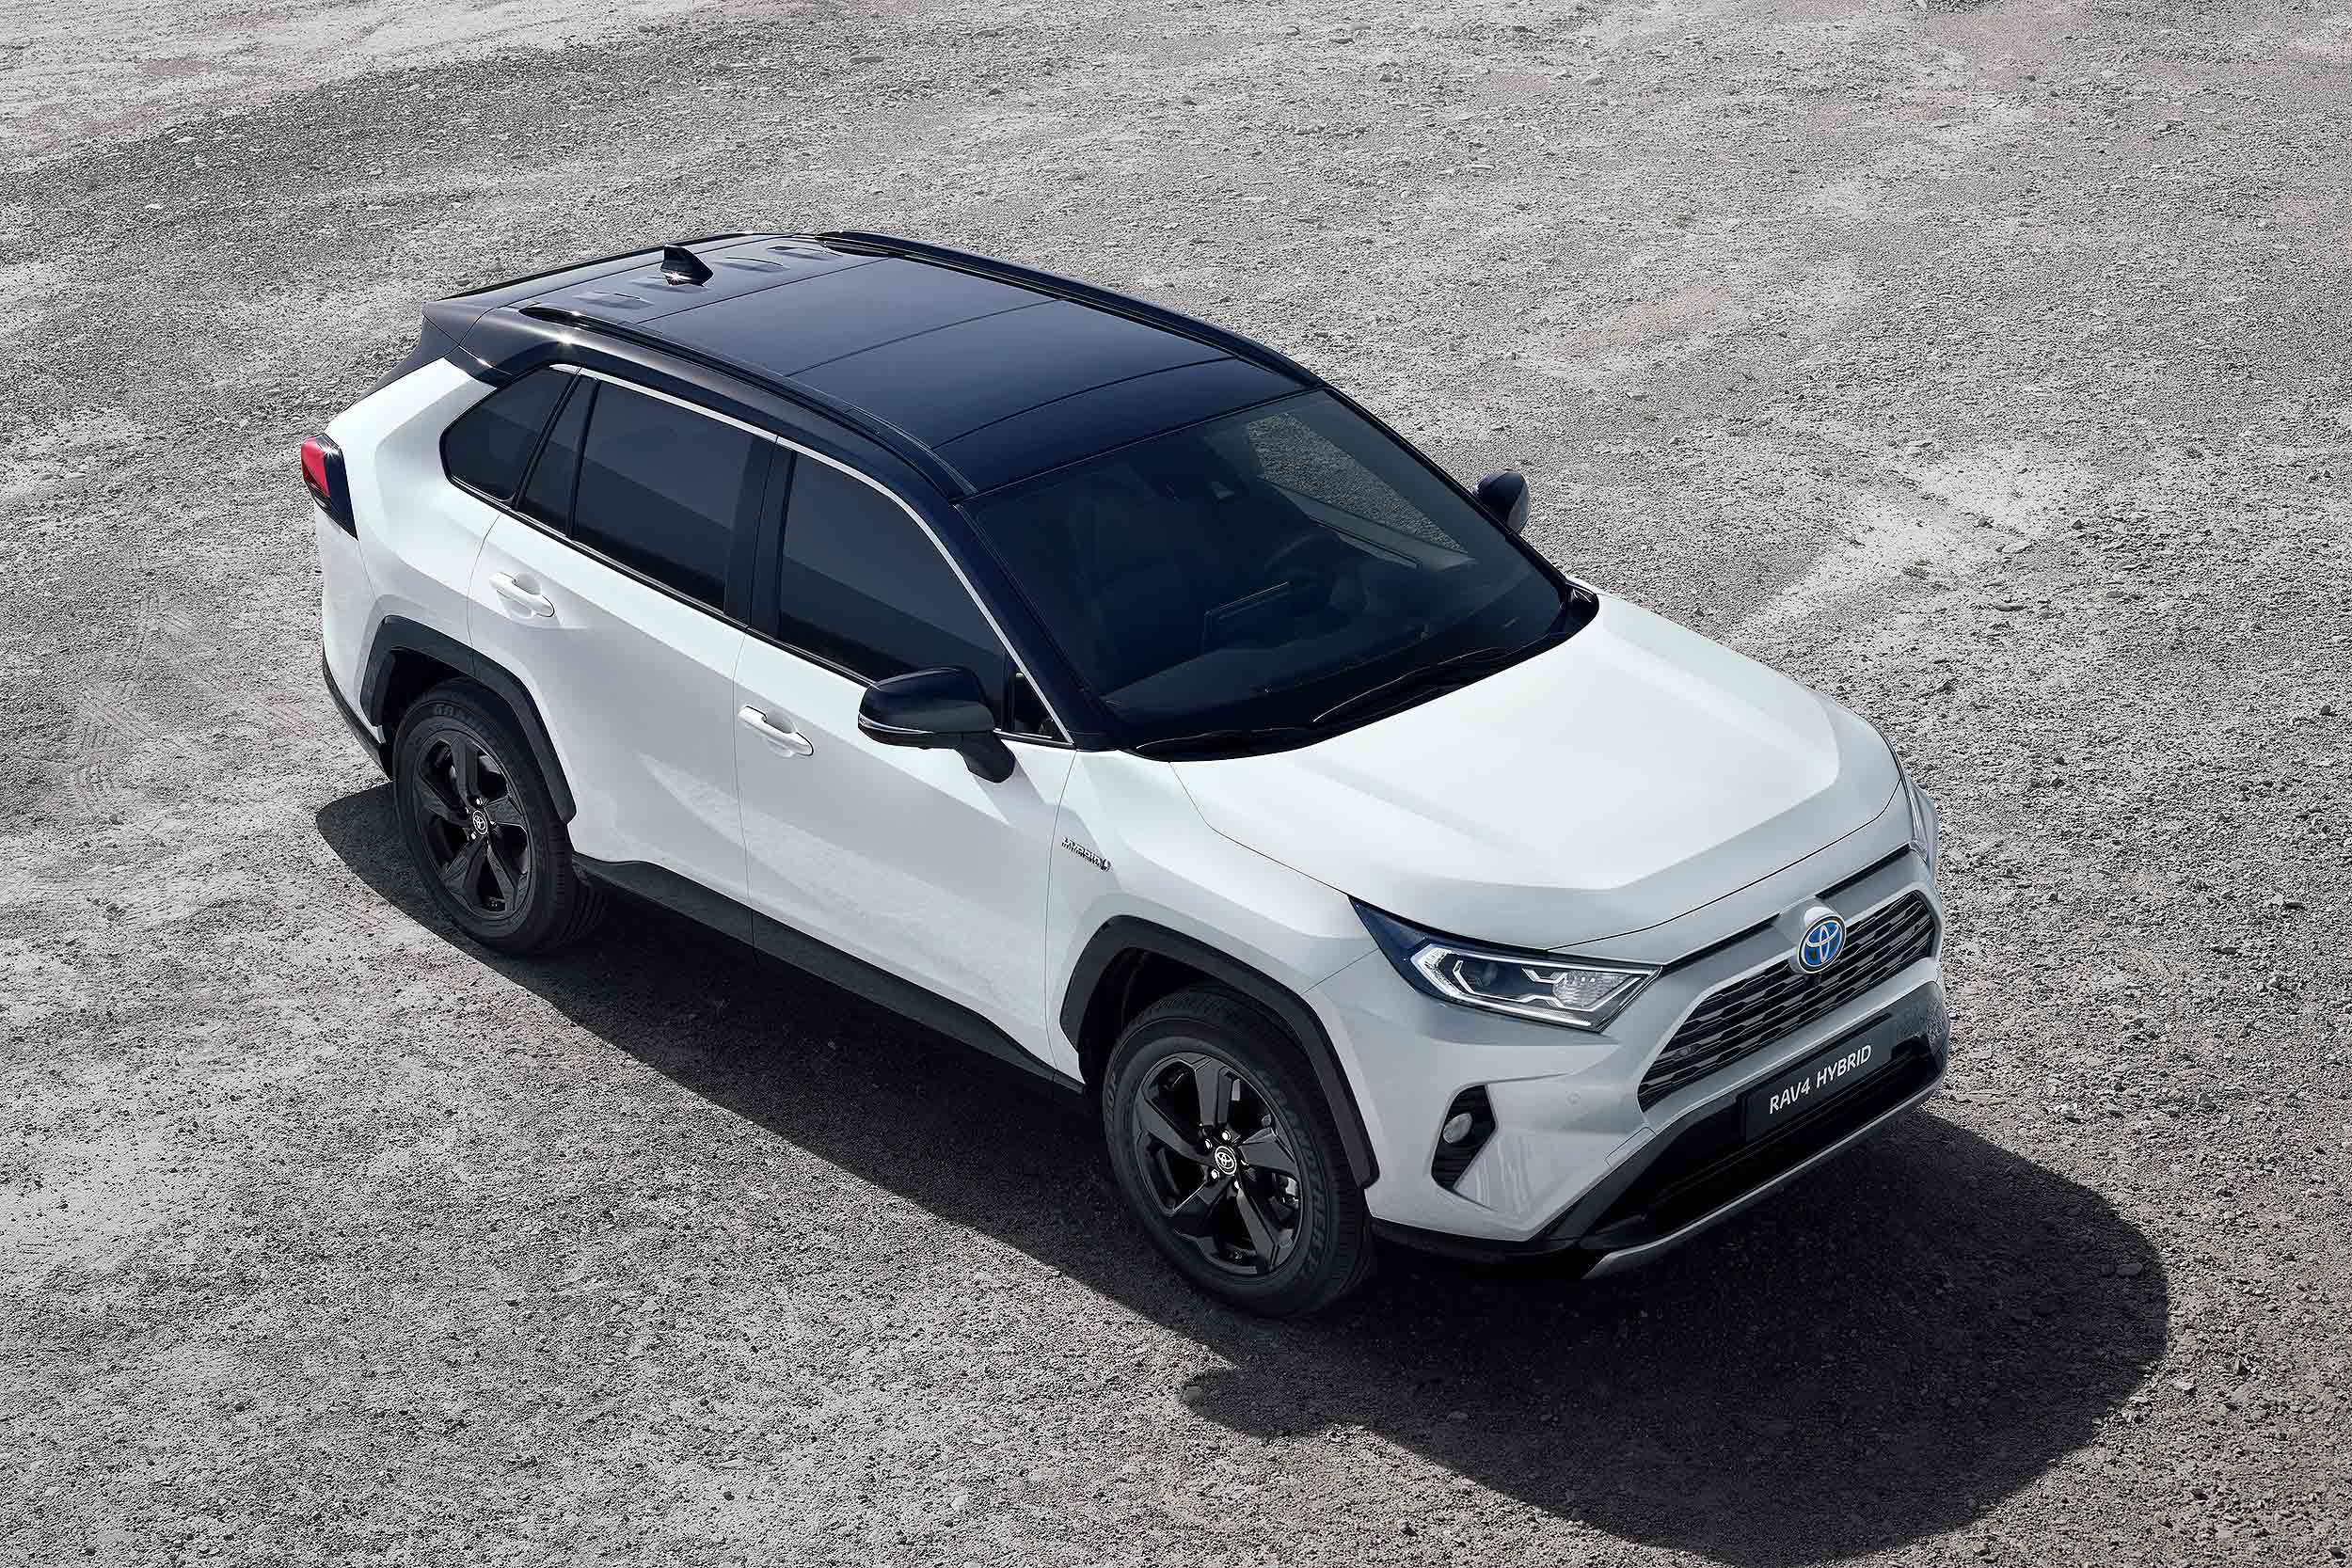 New 2019 Toyota Rav4 Priced From Under 30 000 Motoring Research